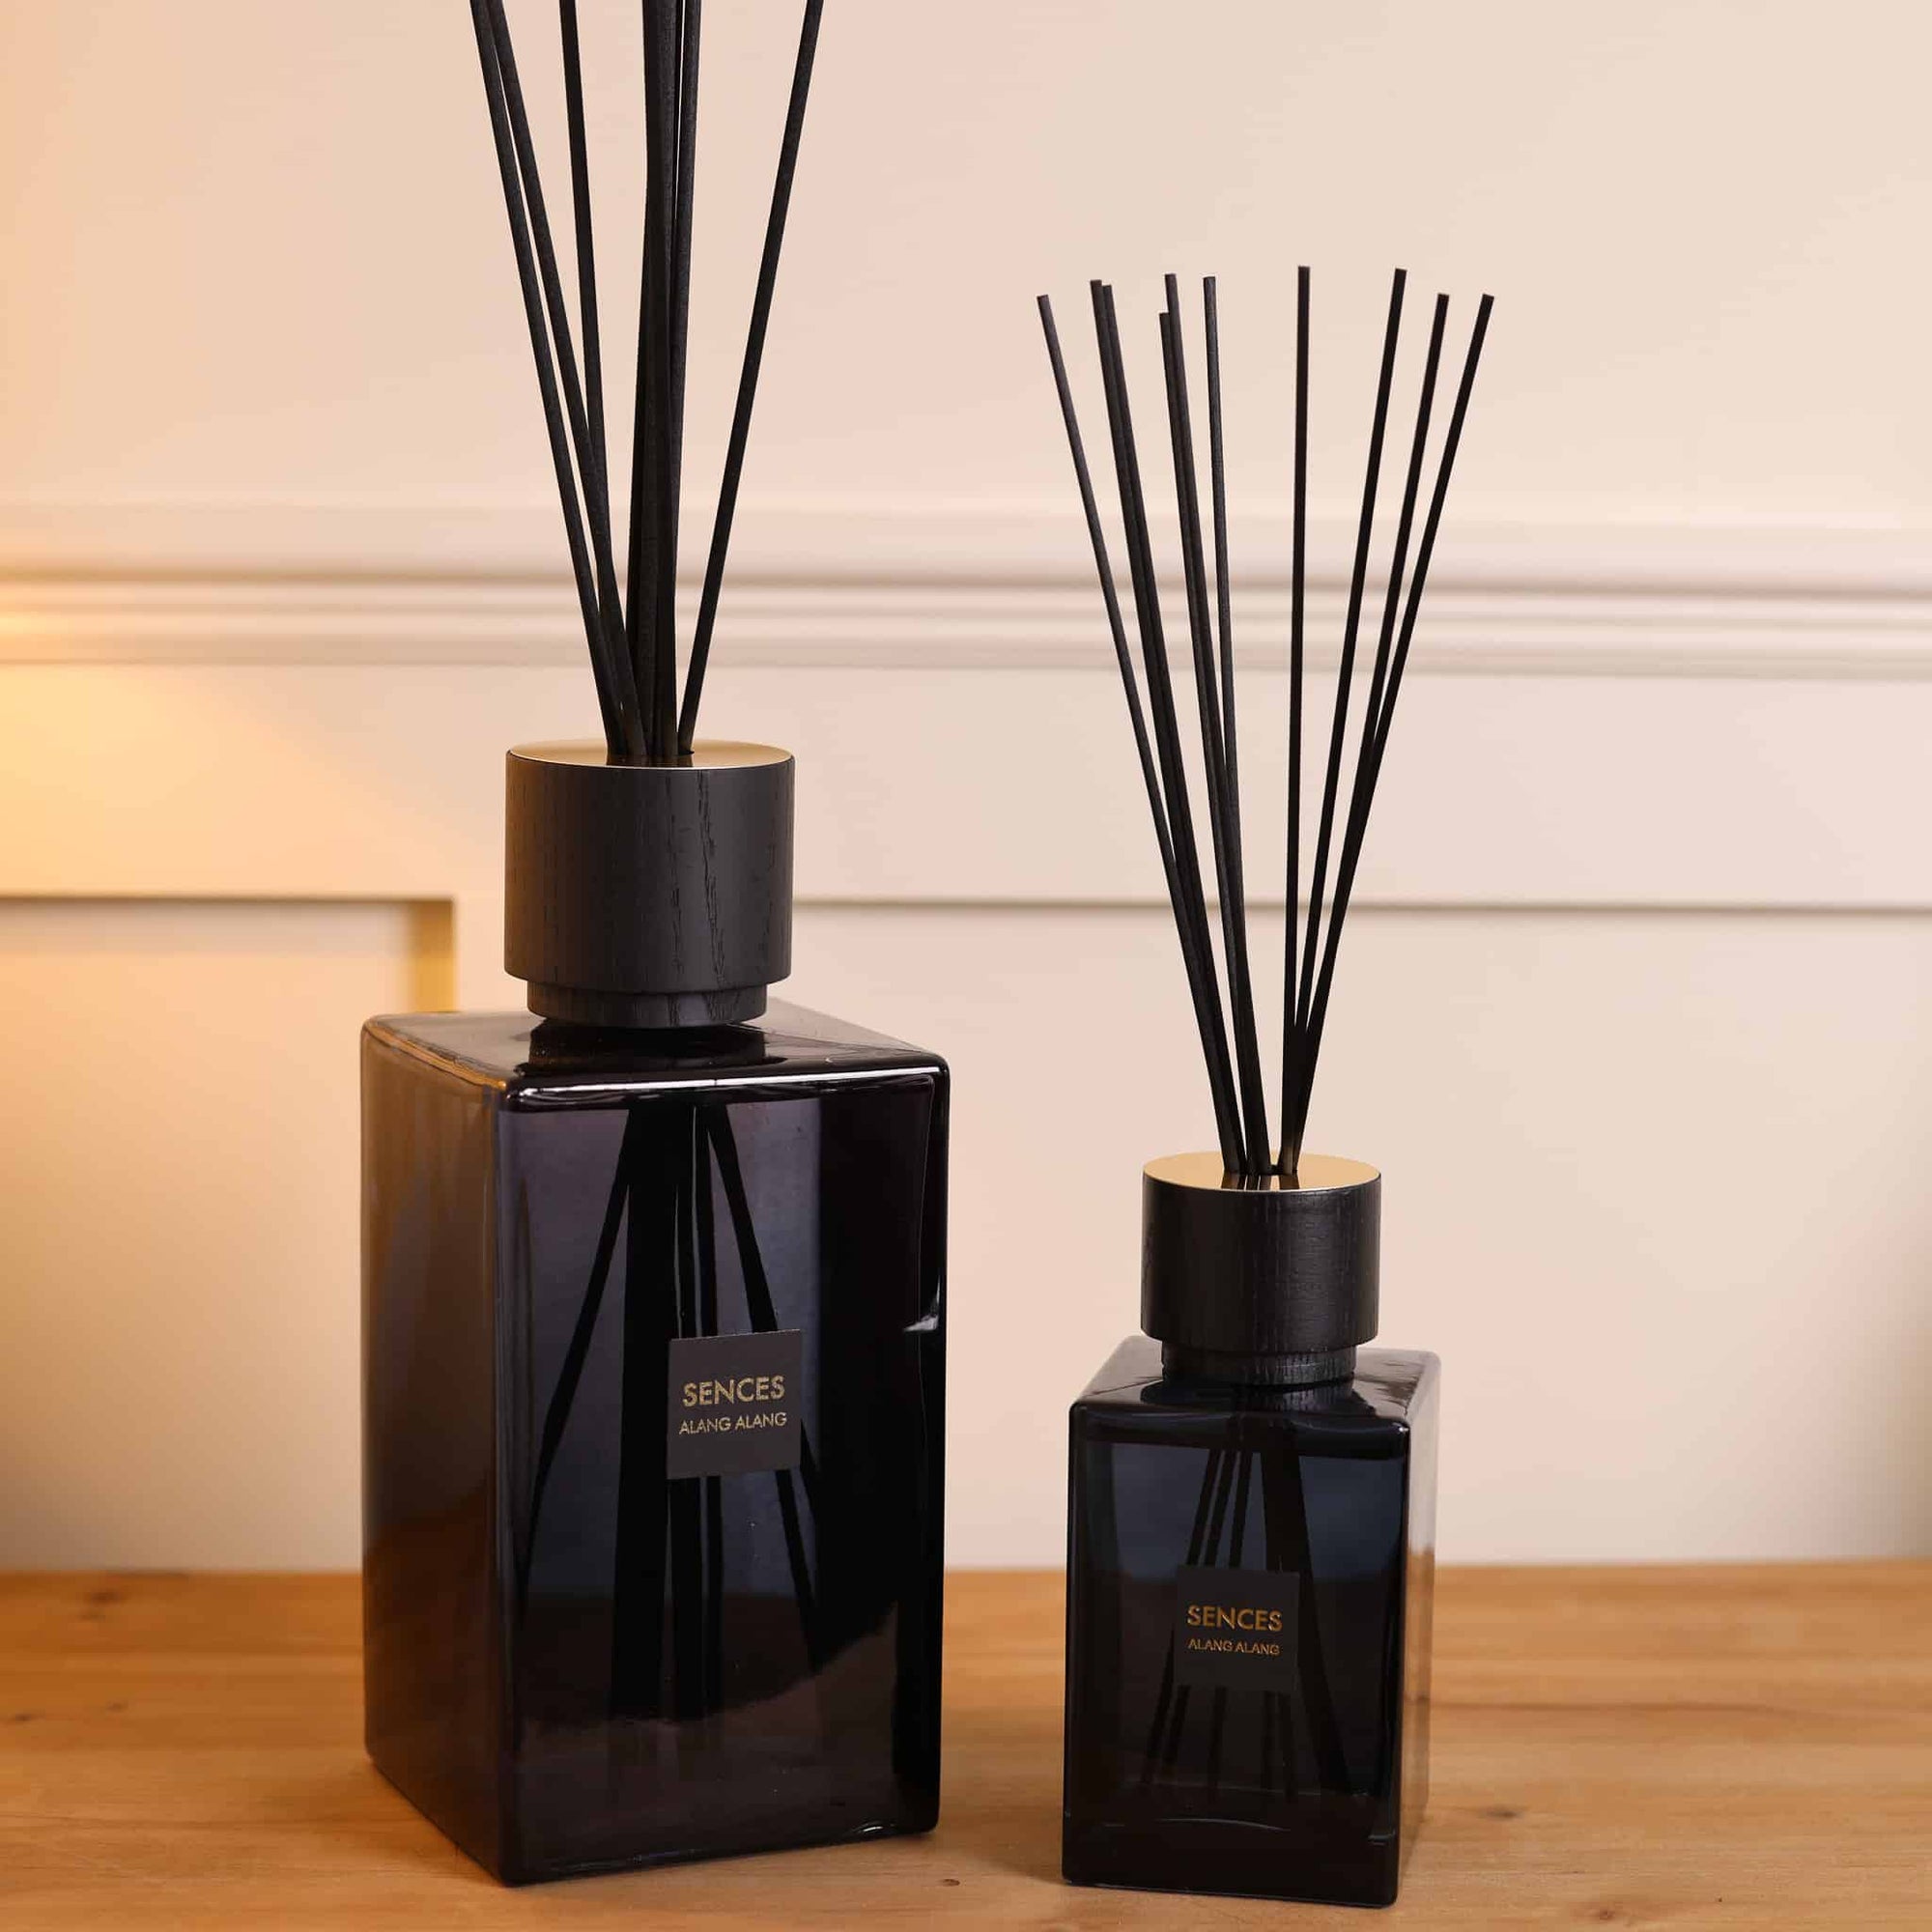 Sences Alang Alang Onyx Extra Large and Small Reed Diffuser on wooden console